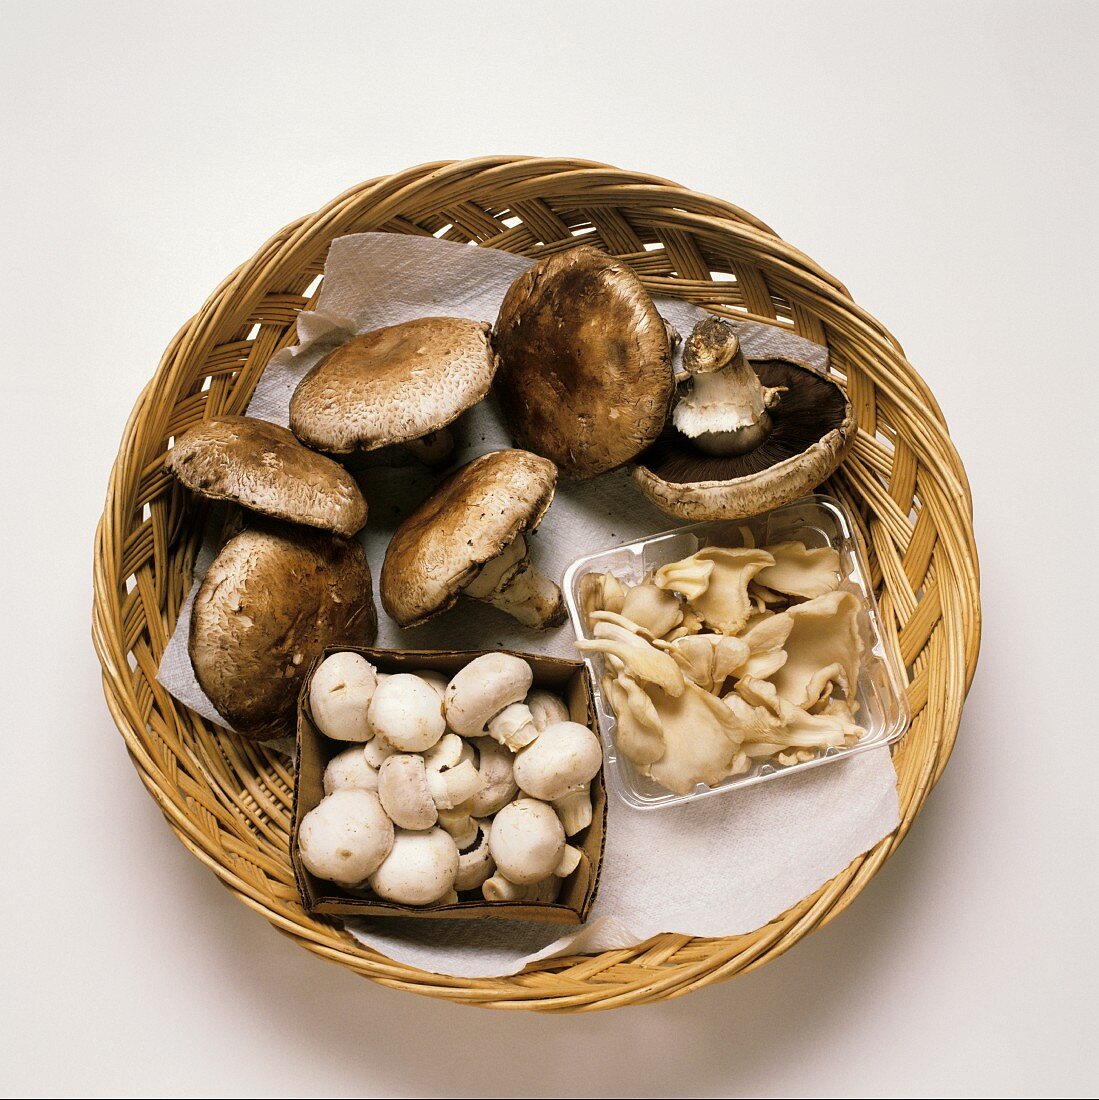 Assorted Mushrooms in a Basket